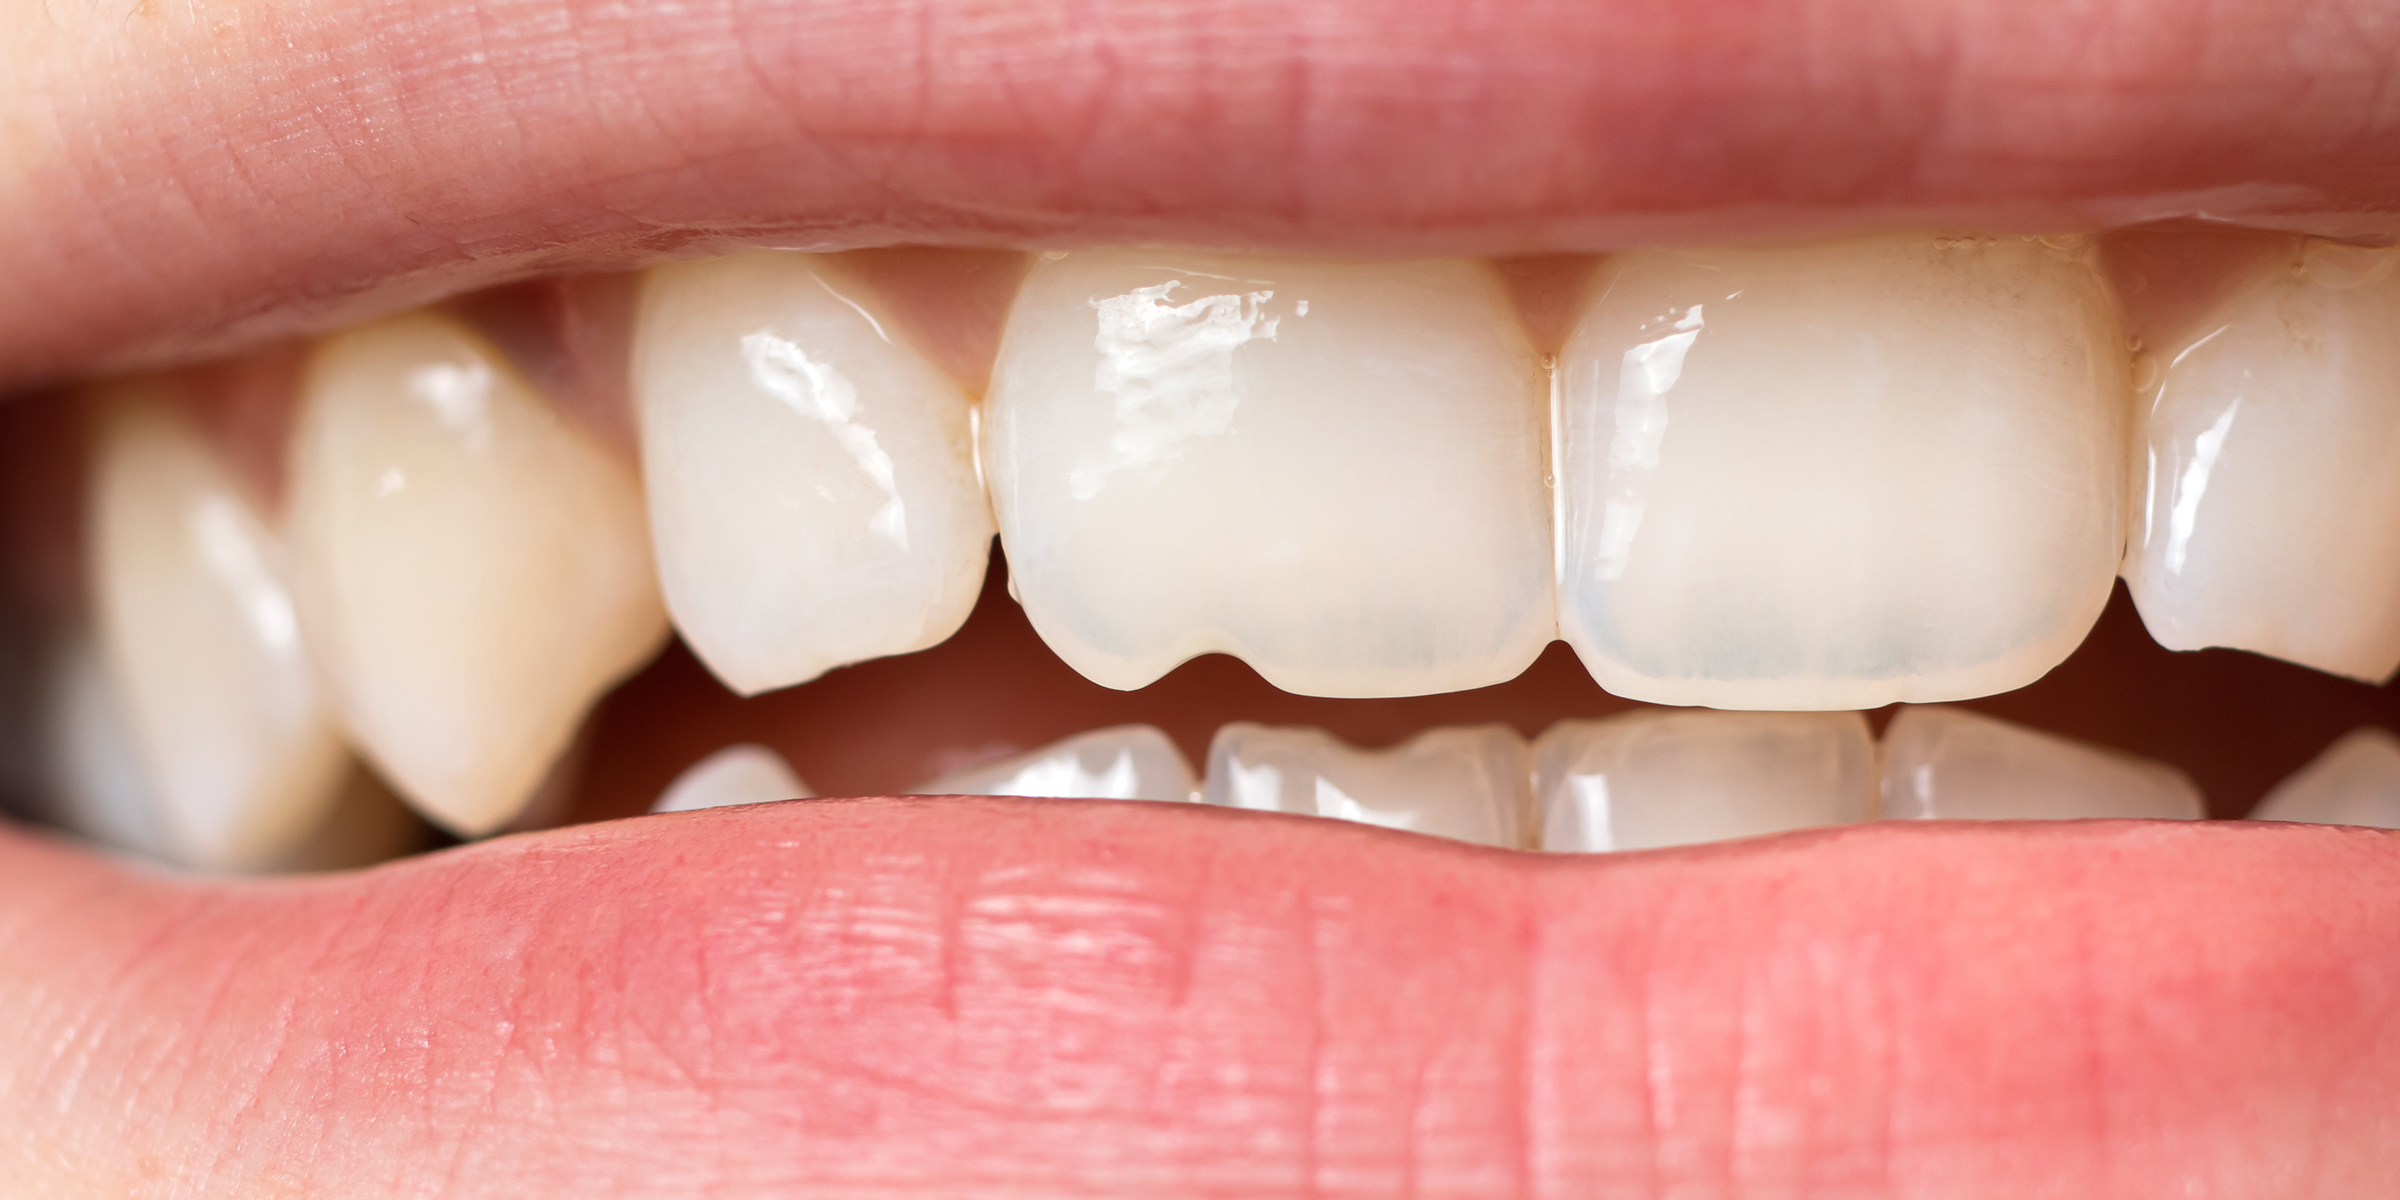 A person's teeth | Source: Shutterstock